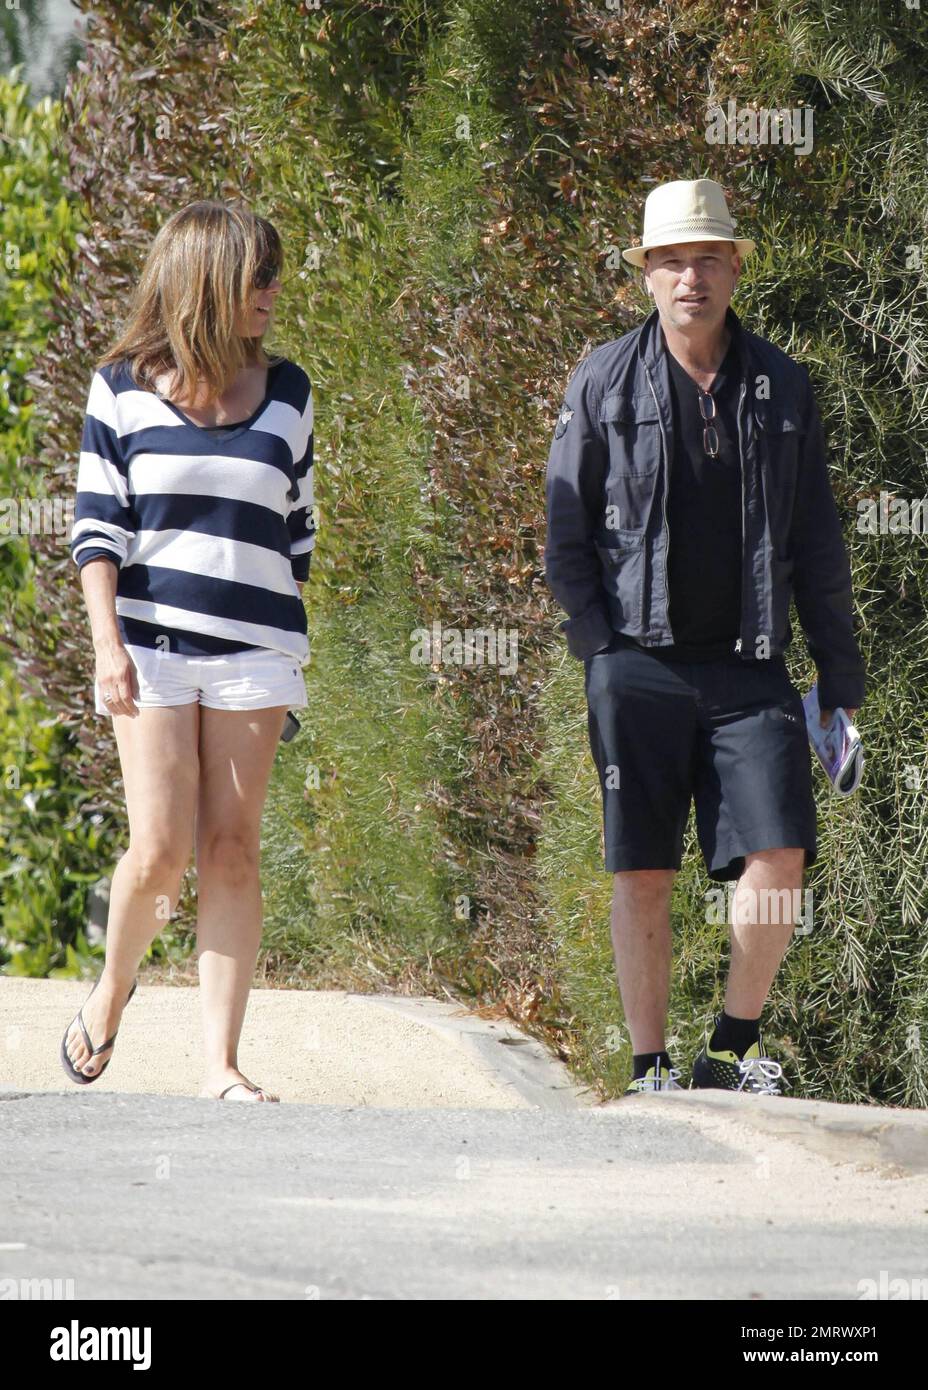 'Deal or No Deal' host Howie Mandel enjoys Labor Day Weekend by taking a stroll with his wife Terry Soil around his Malibu neighborhood. Malibu, CA. 4th September 2011. Stock Photo